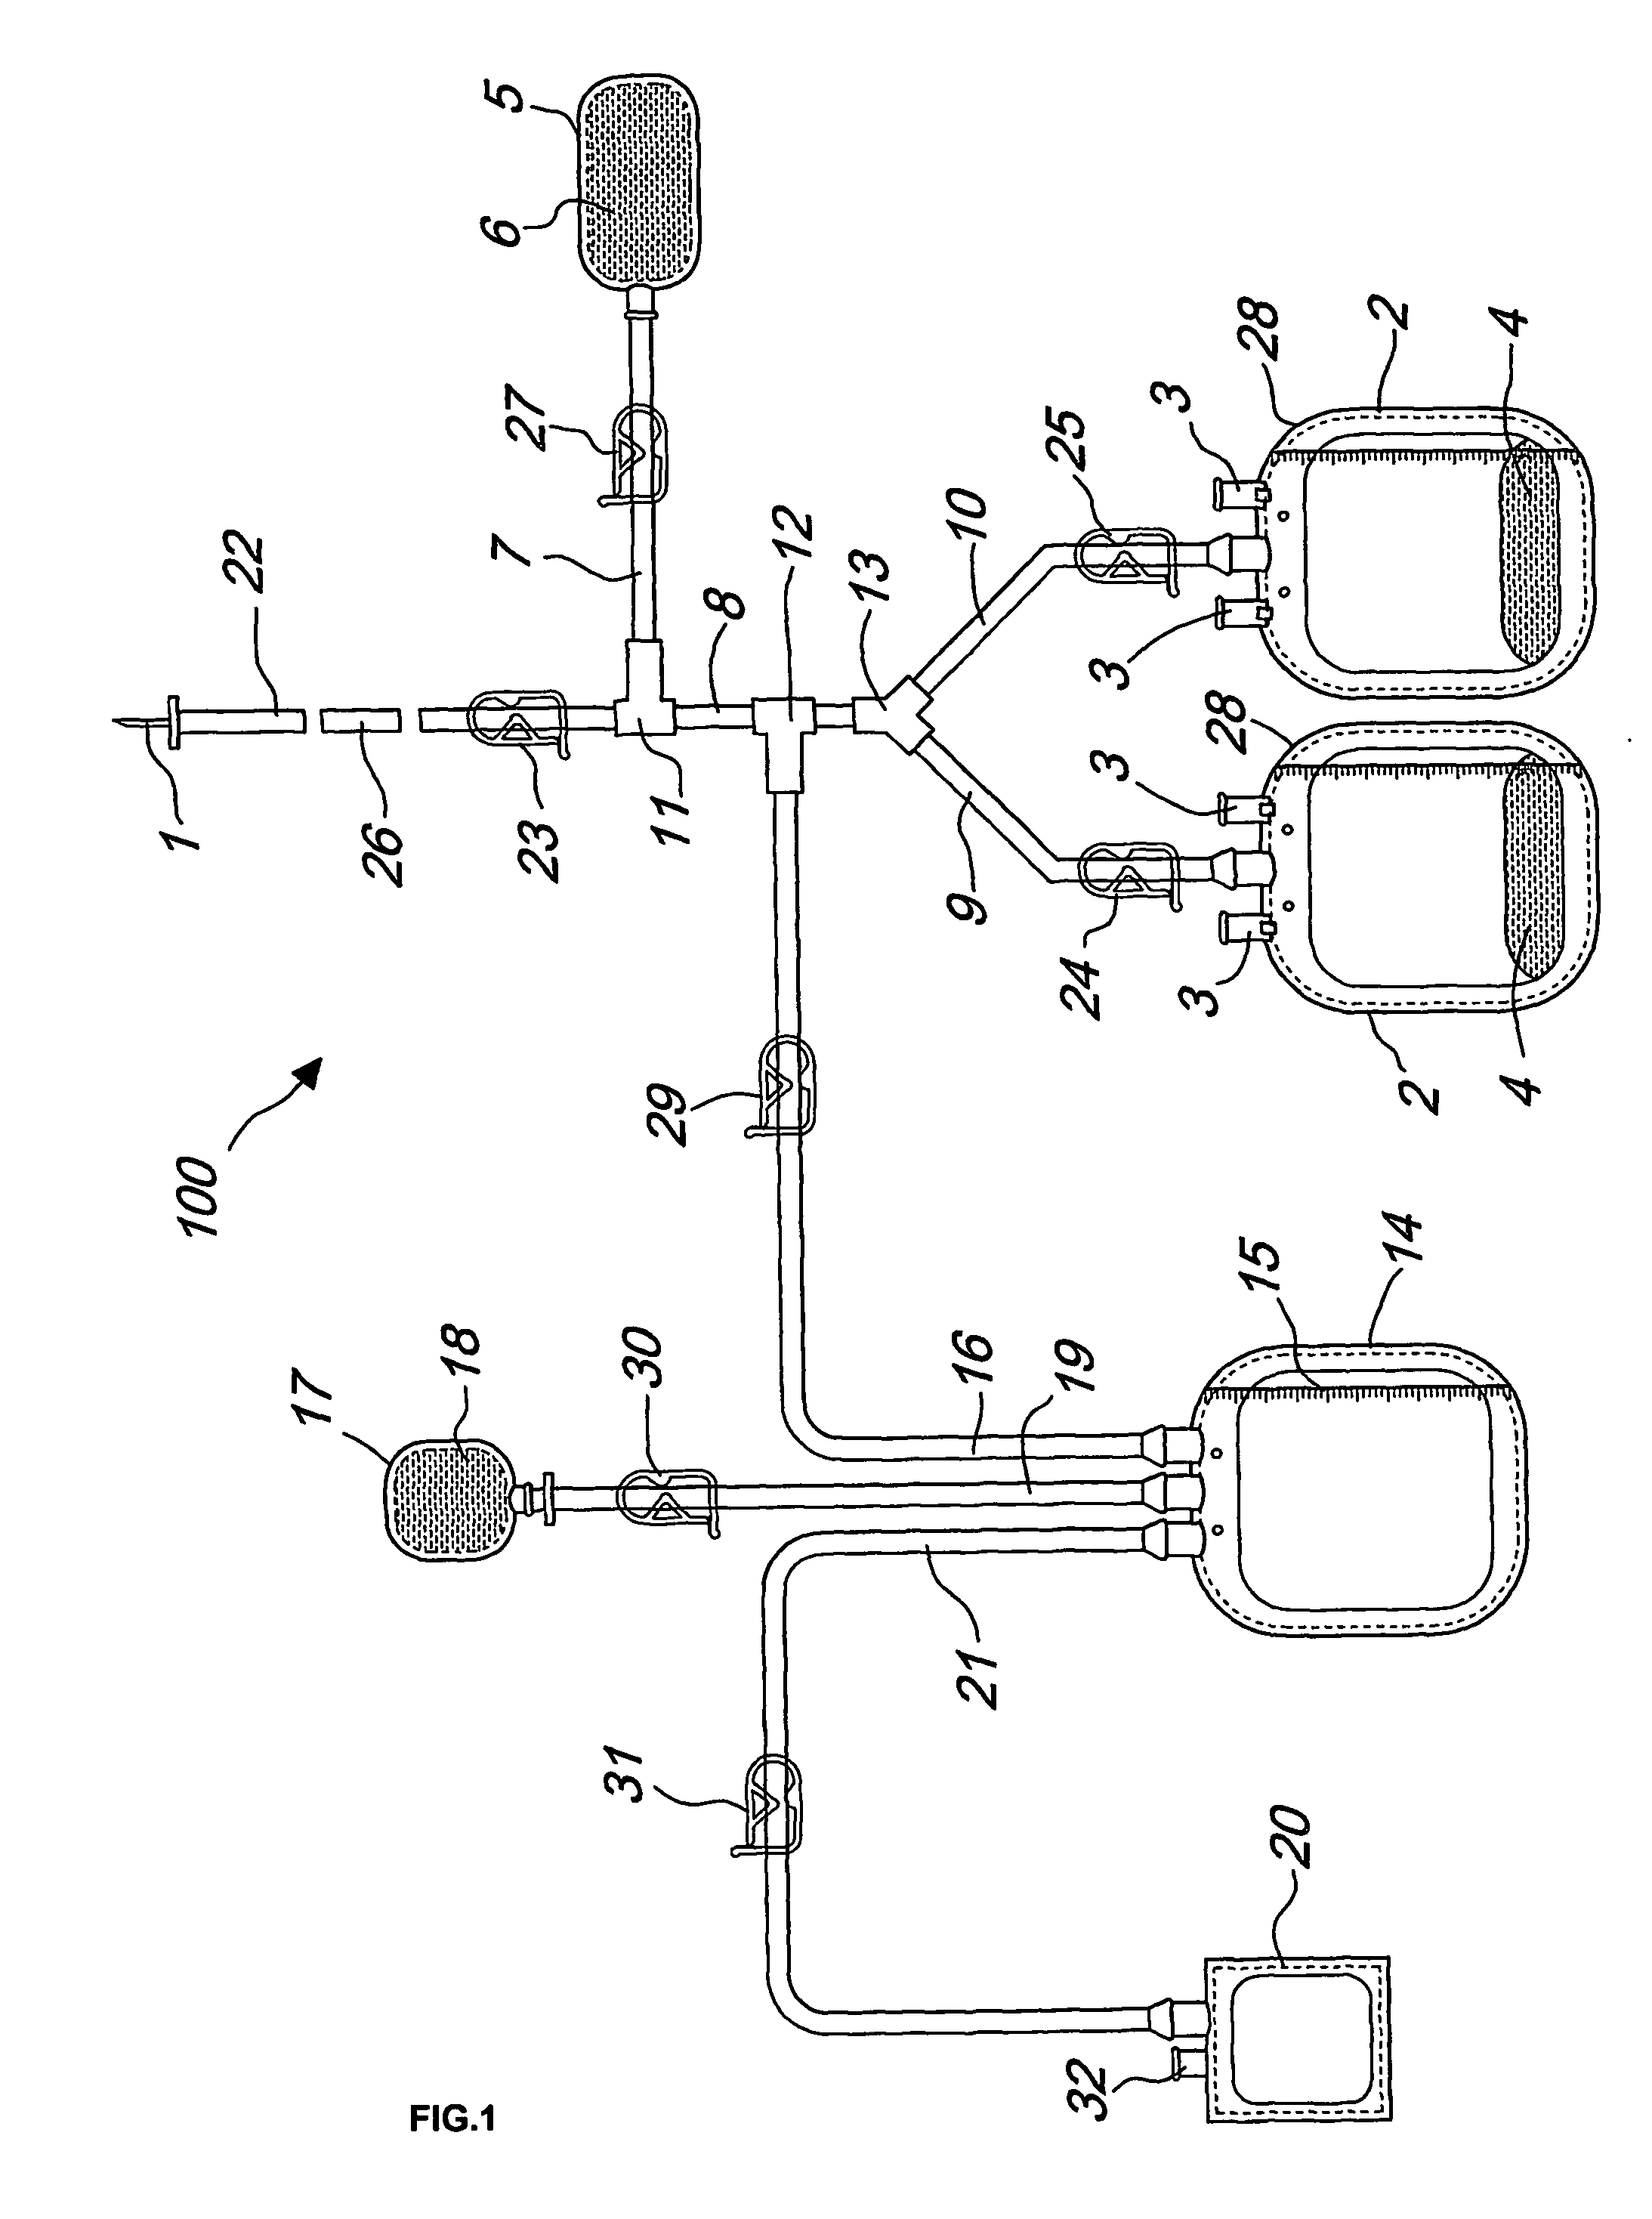 Method and apparatus for fractionating blood